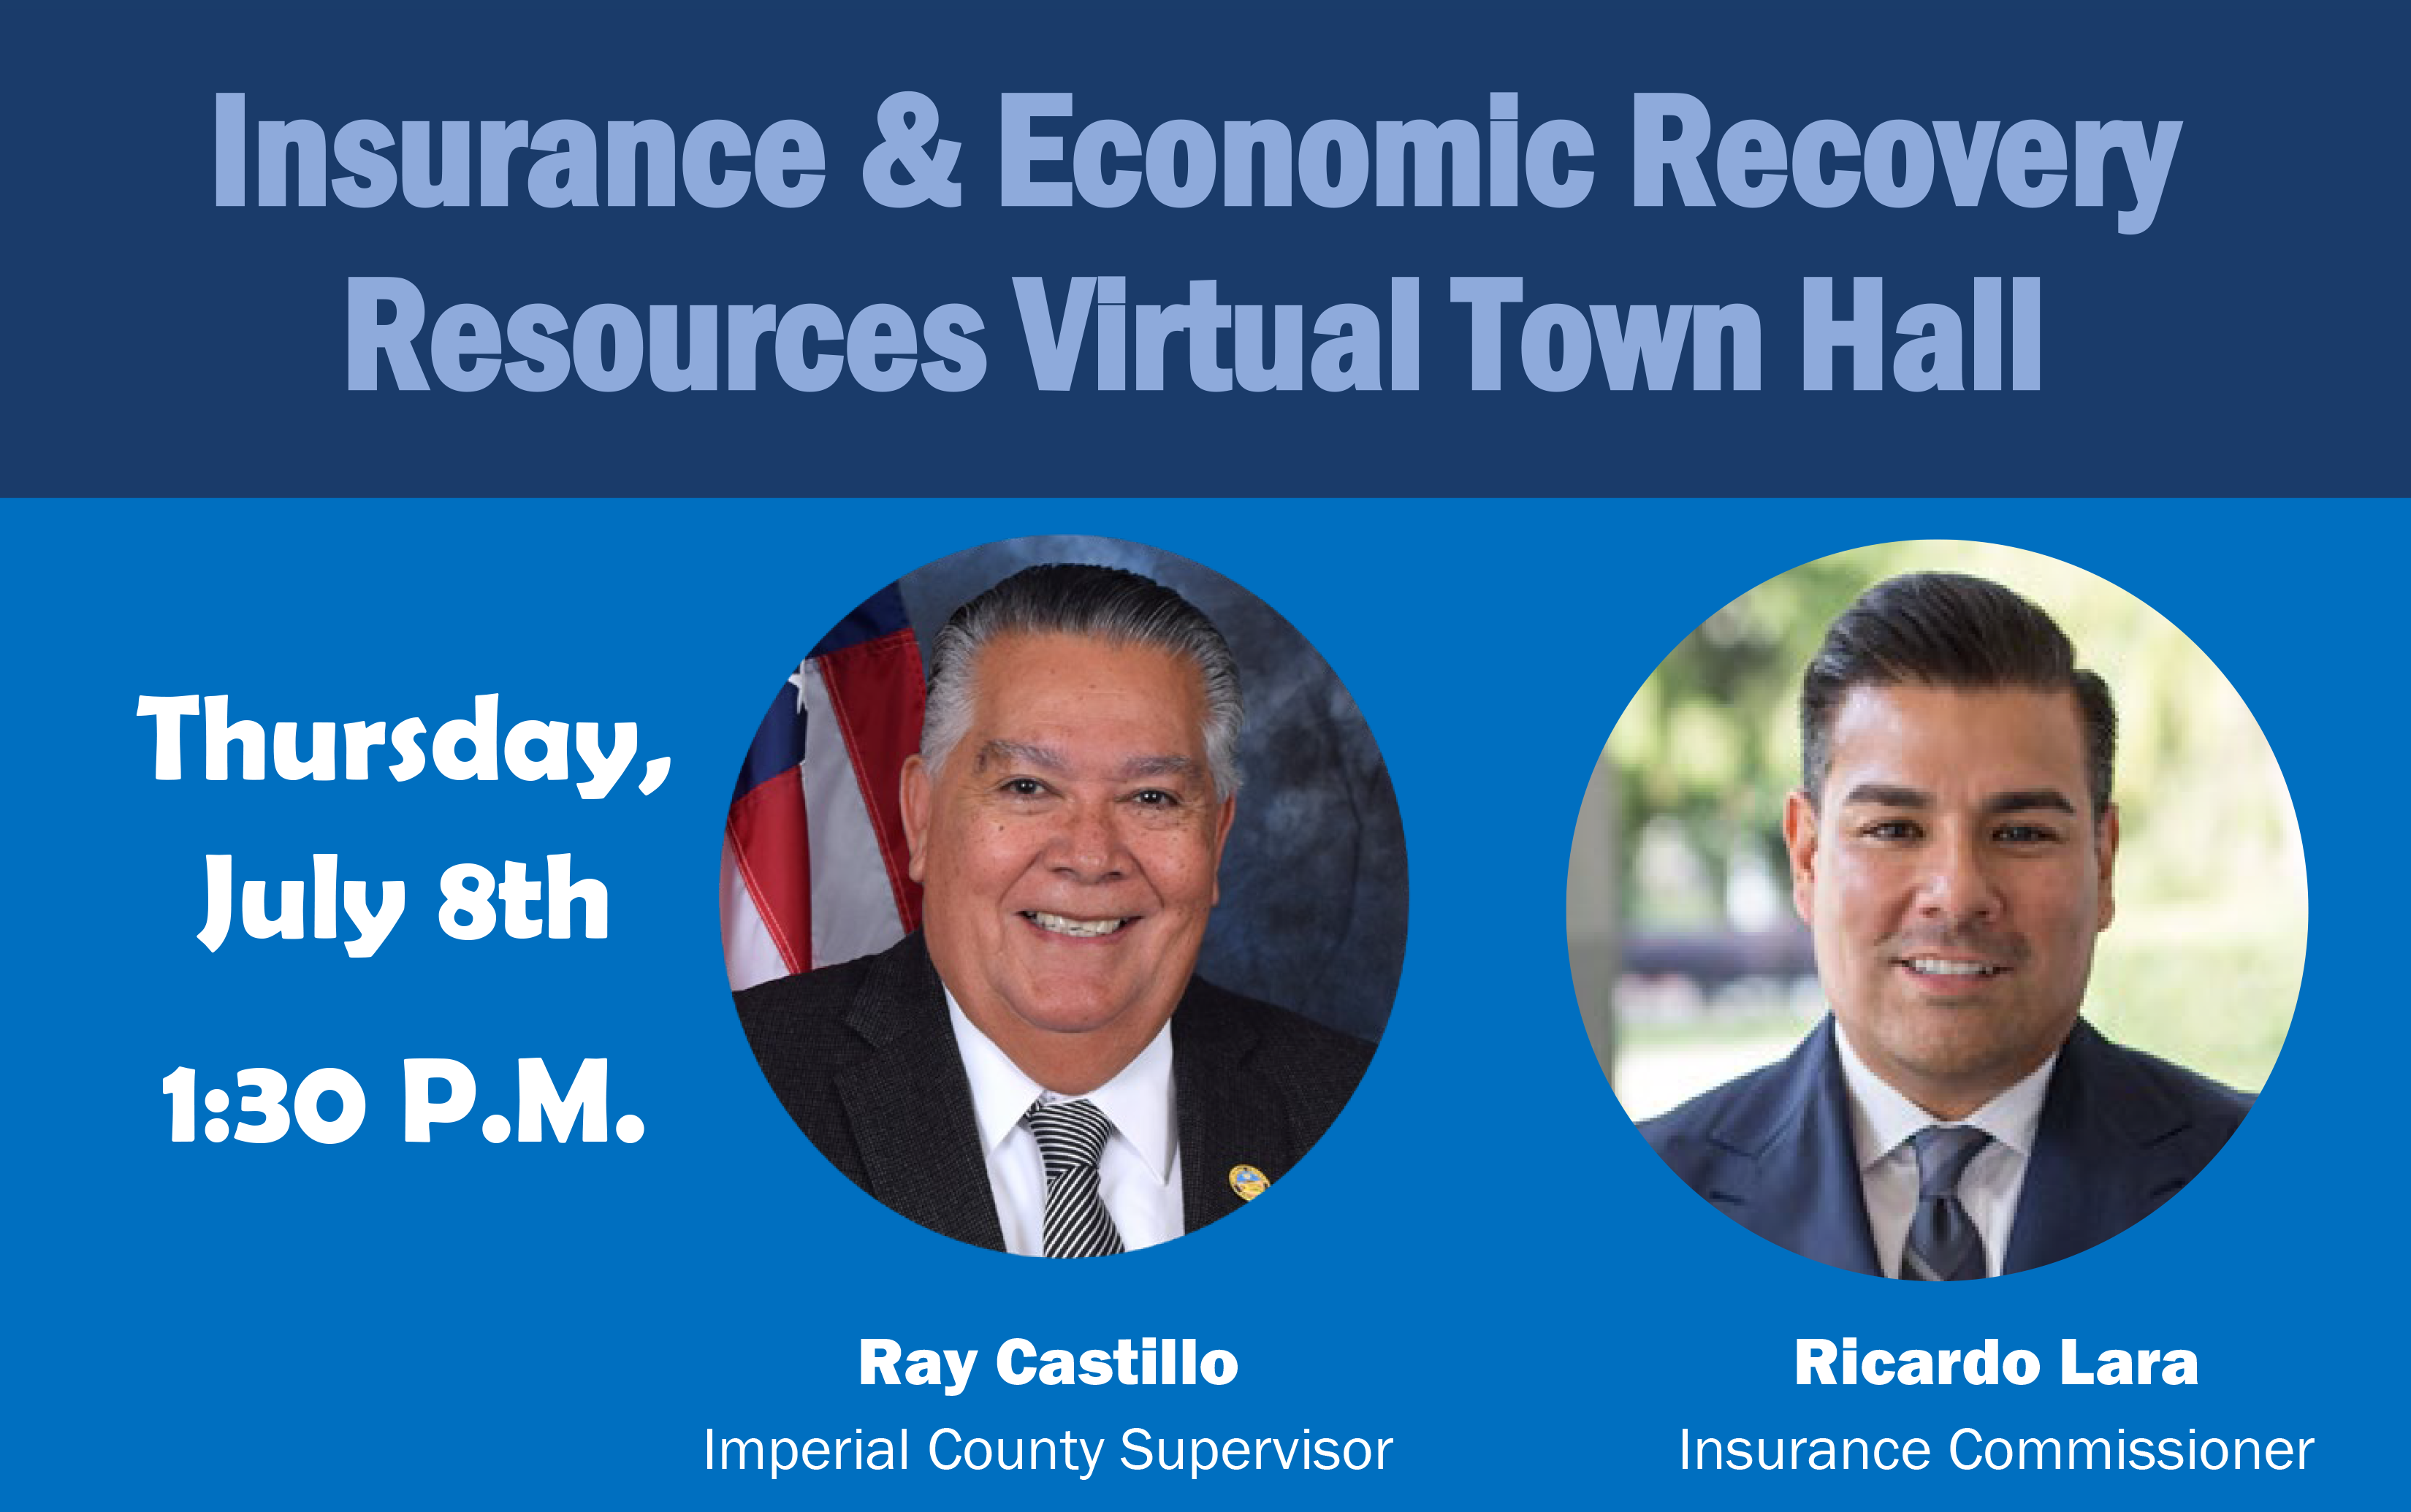 Insurance &amp; Economic Recovery Resources Virtual Town Hall
Hosted by Supervisor Ray Castillo
Thursday,
July 8th
1:30 P.M.
Imperial County Supervisor Ray Castillo
Ricardo Lara
Insurance Commissioner